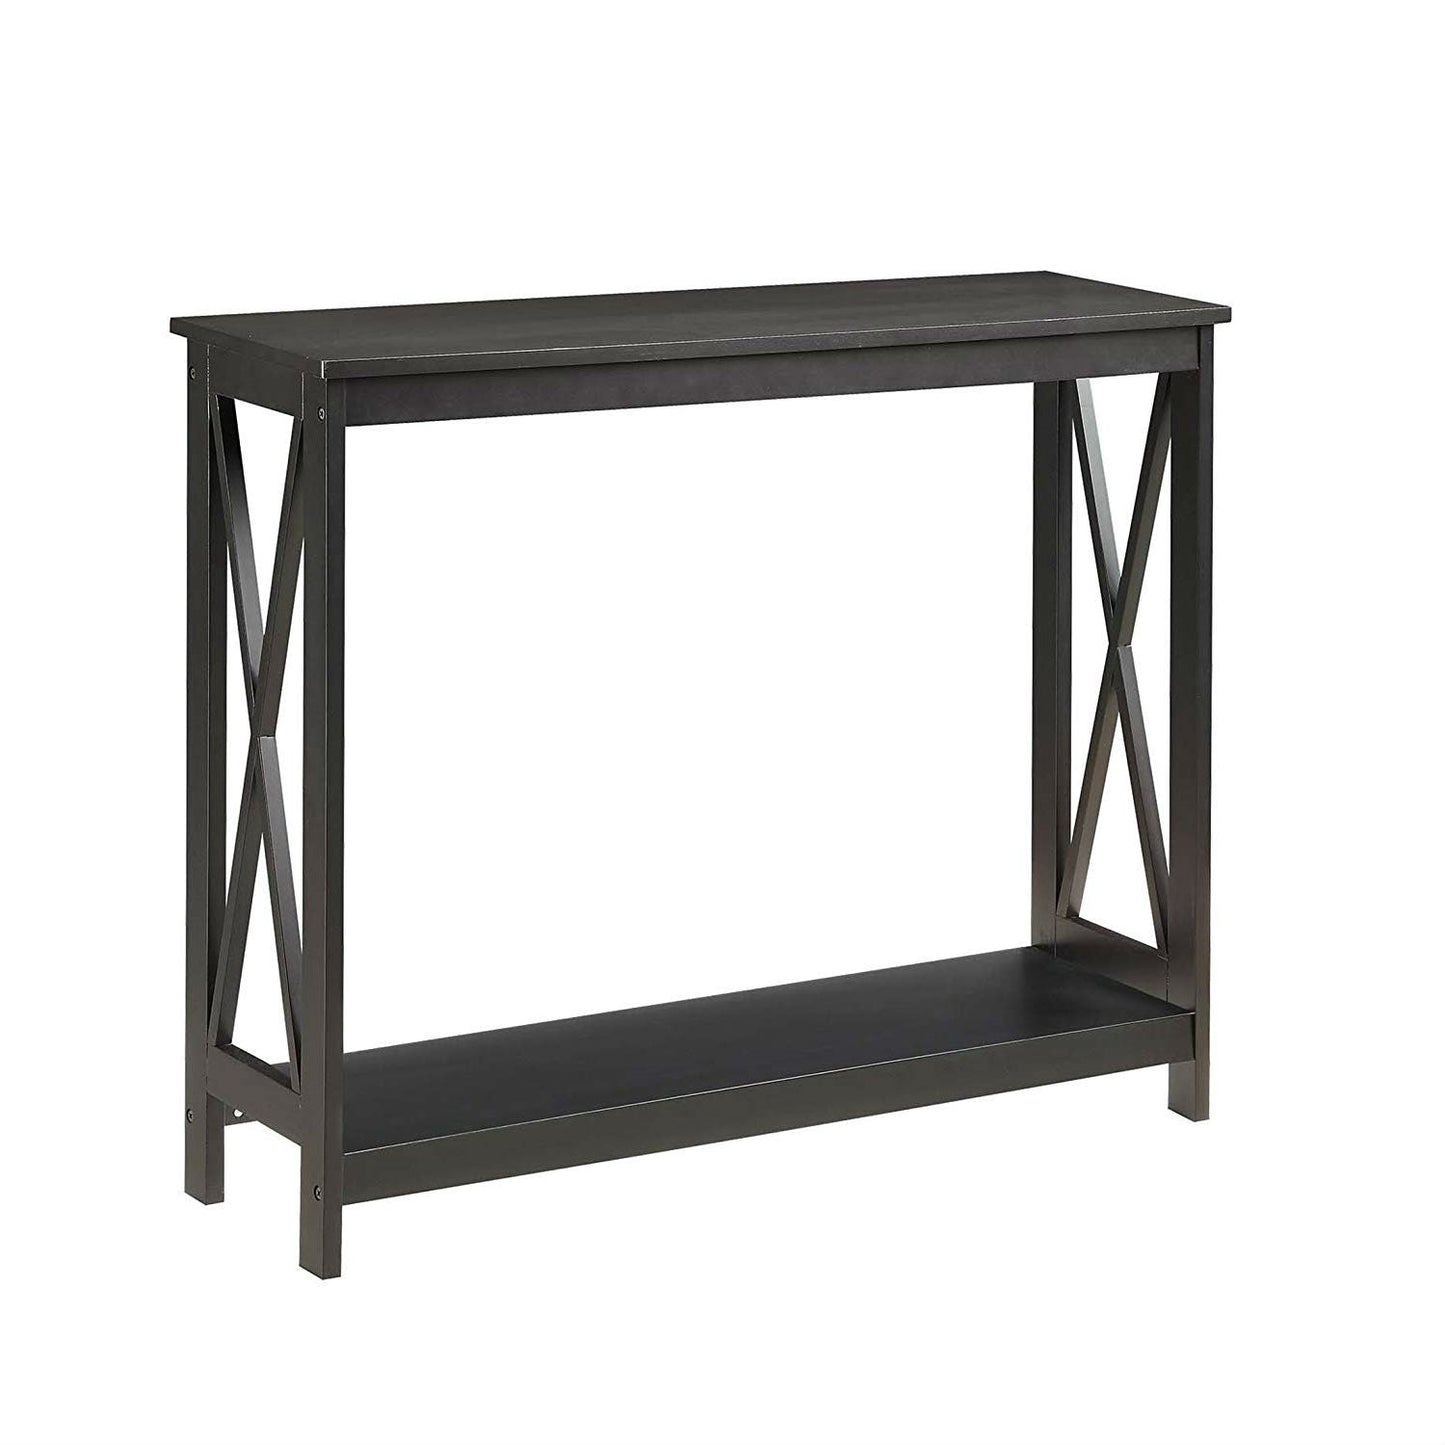 Living Room > Console & Sofa Tables - Black Wood Console Sofa Table With Bottom Storage Shelf